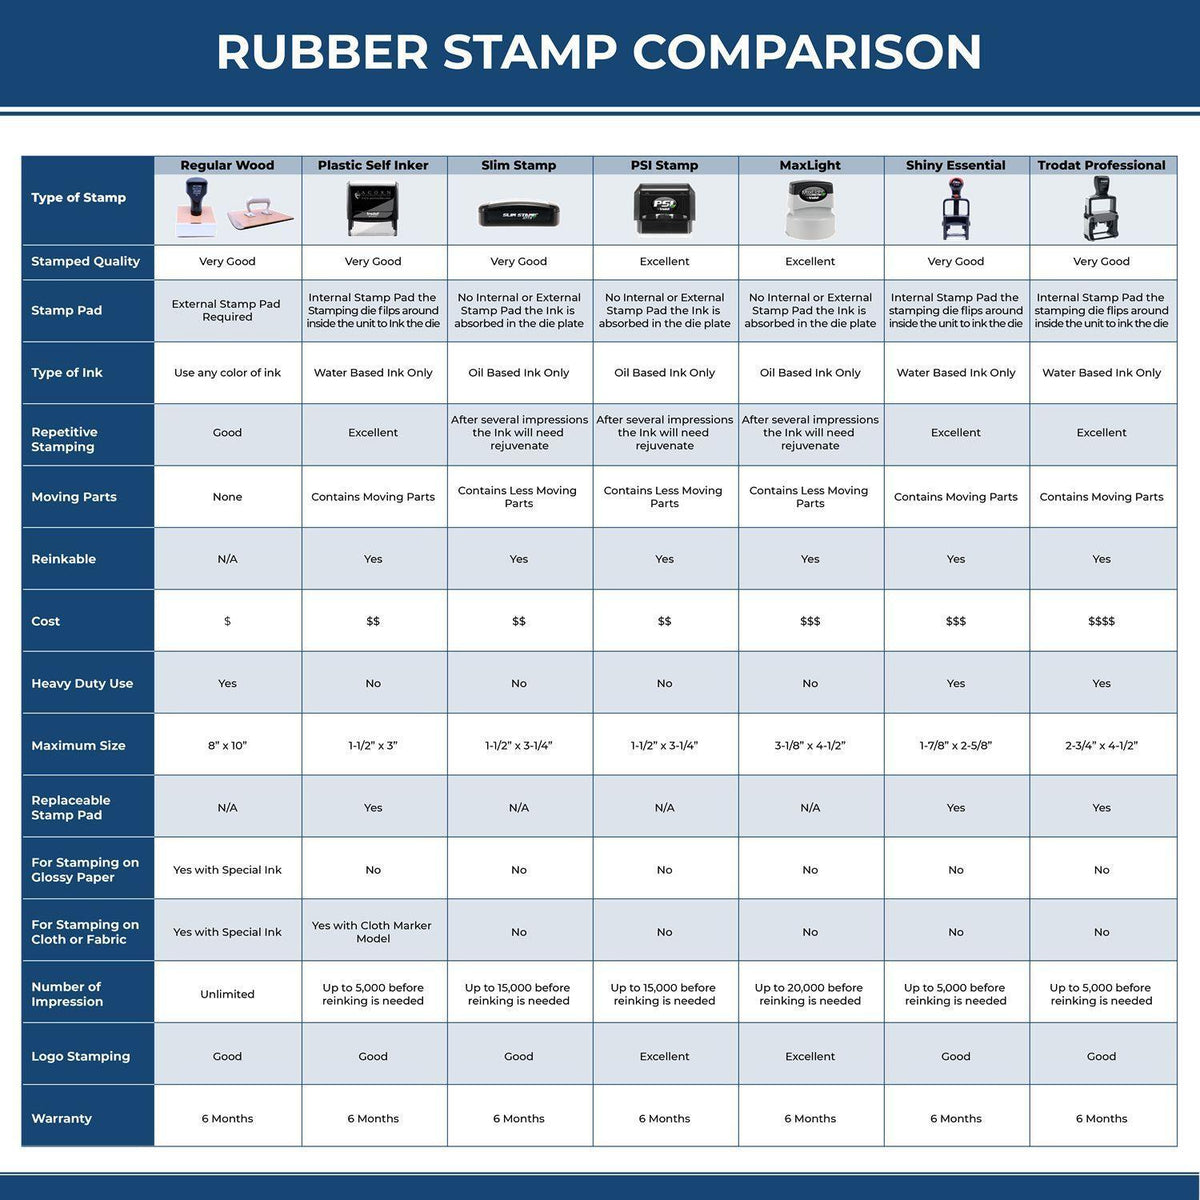 Large Mortgages Rubber Stamp 4573R Rubber Stamp Comparison